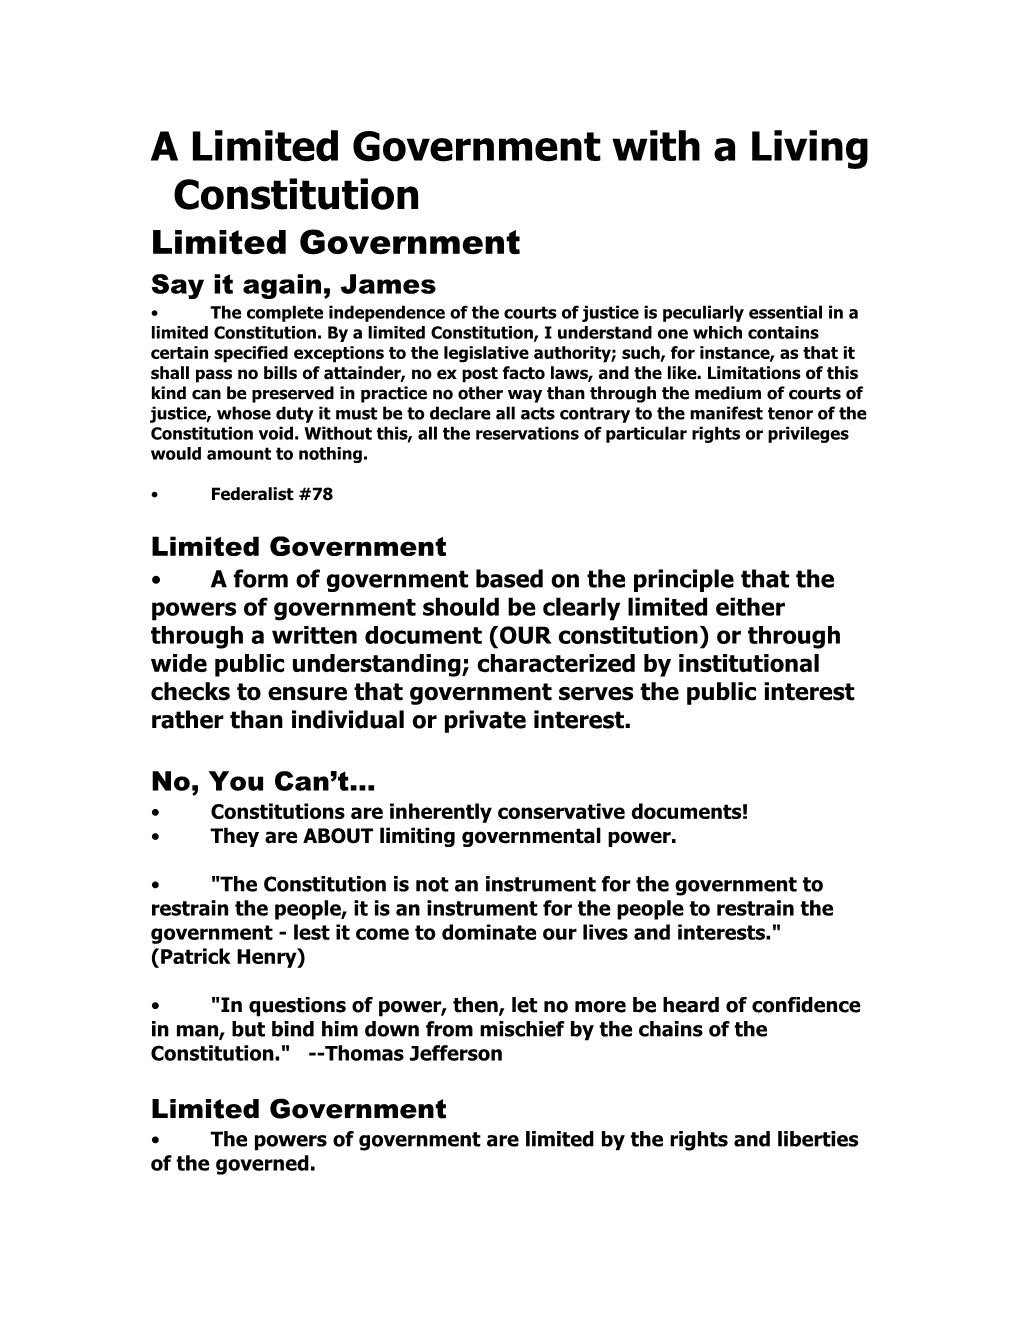 A Limited Government with a Living Constitution